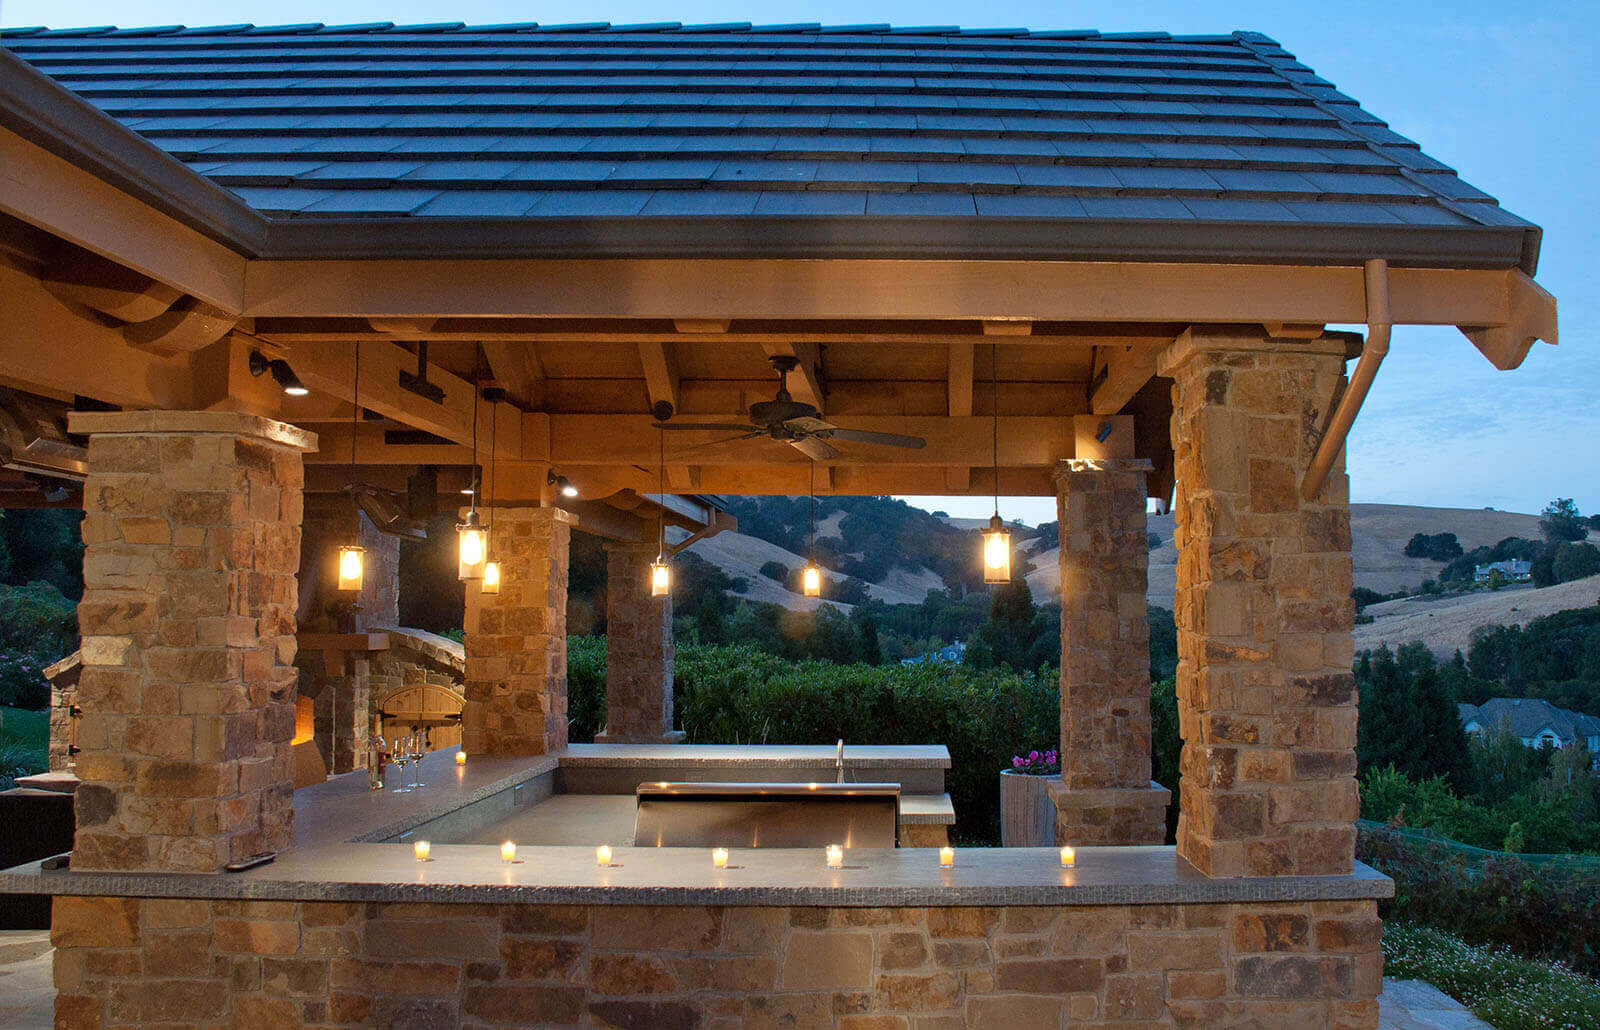 Covered veranda with wrapping counters and hanging lighting fixtures from roof